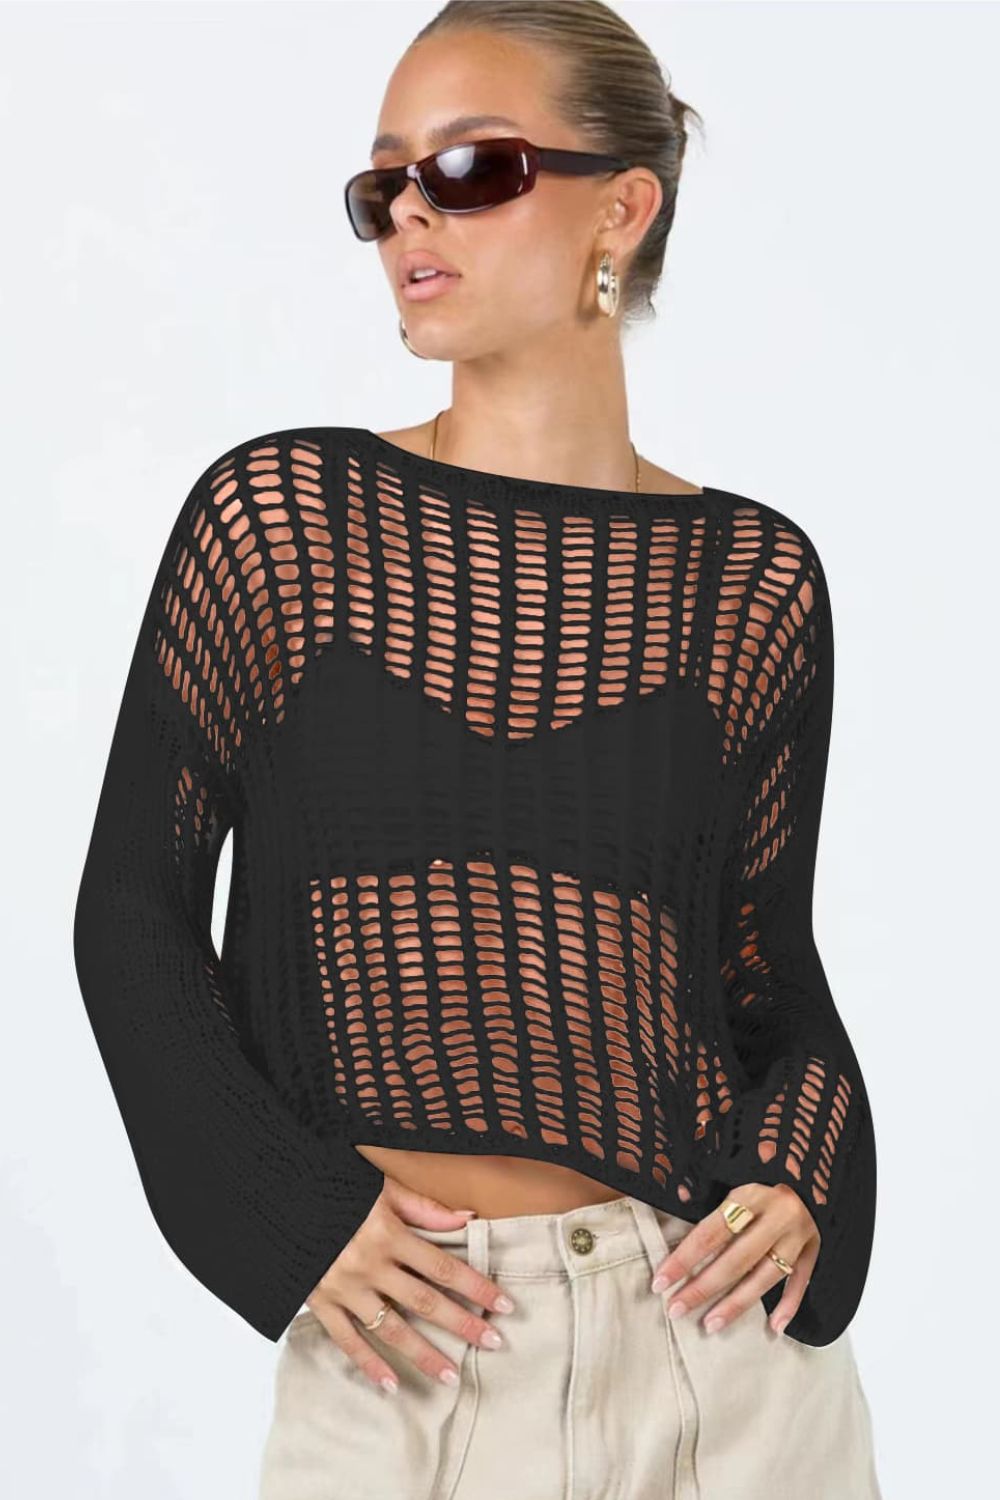 Openwork Boat Neck Long Sleeve Cover Up - nailedmoms